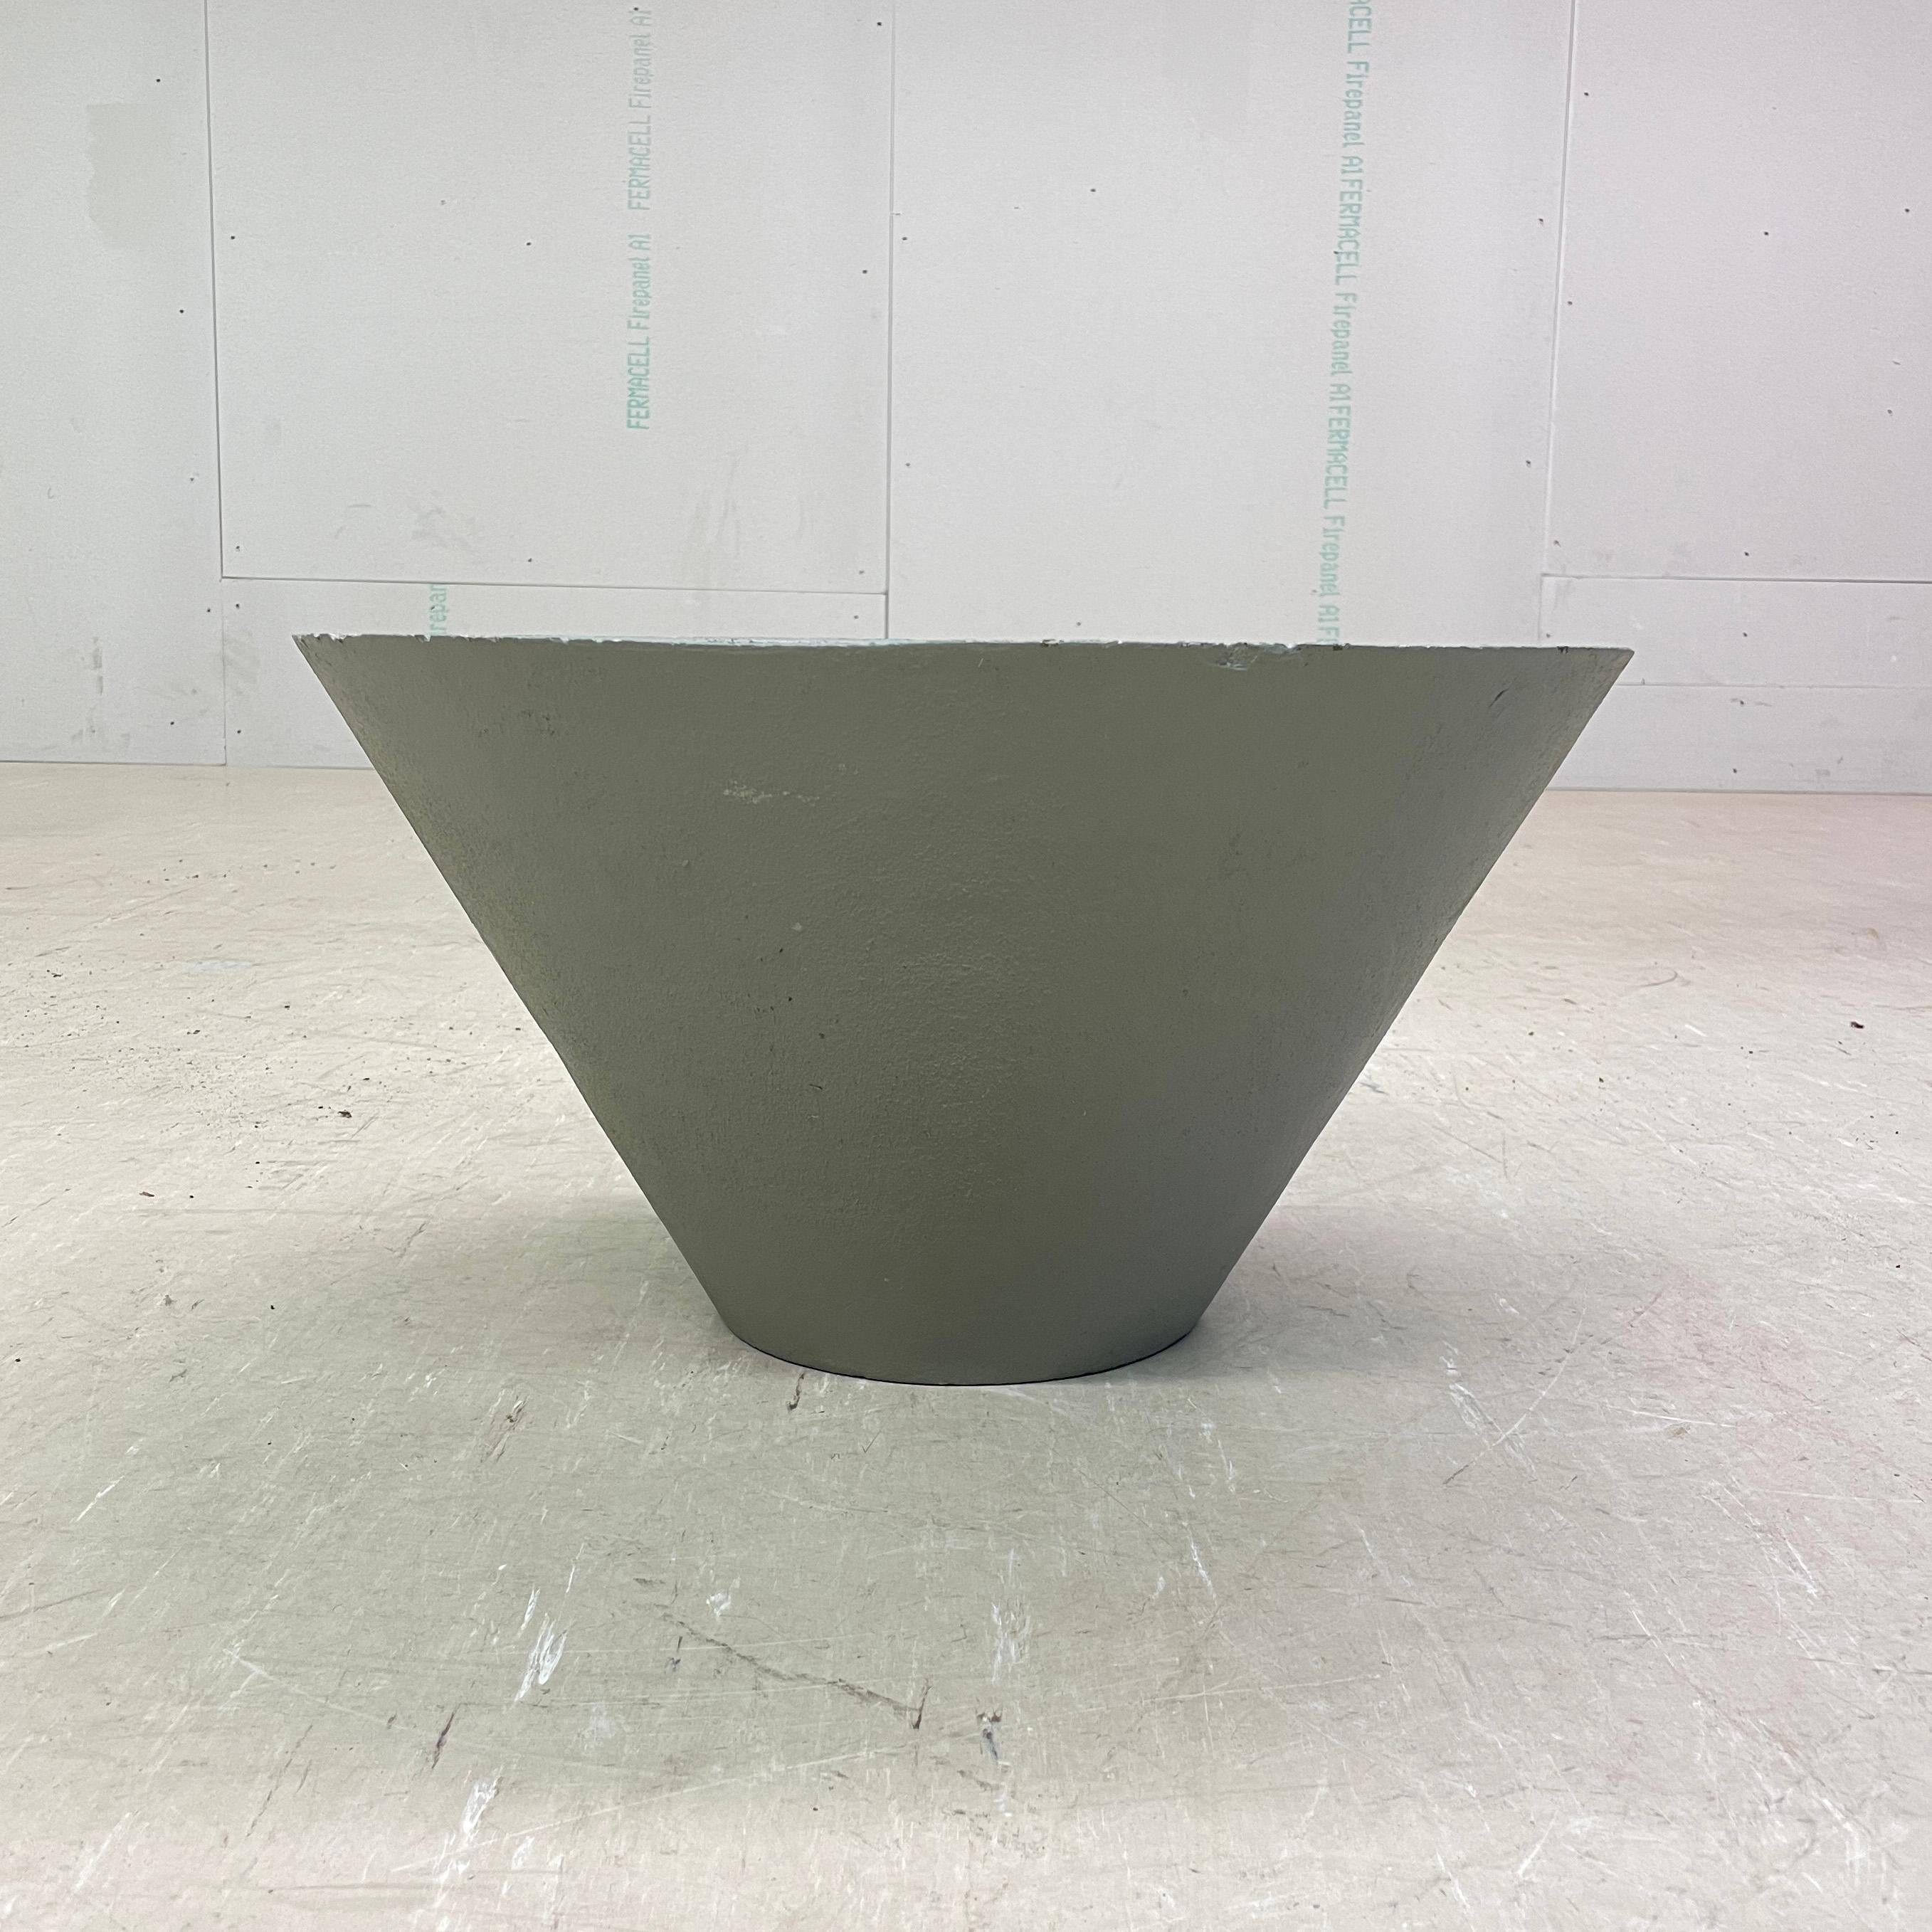 Conical concrete flower pot by Swiss designer, Willy Guhl. Solid concrete made in Switzerland 1960 - 1970. Produced by Eternit AG.  
Tapered structure with drainage holes in base. The outer side and top edge of the inner side of the Planter has been